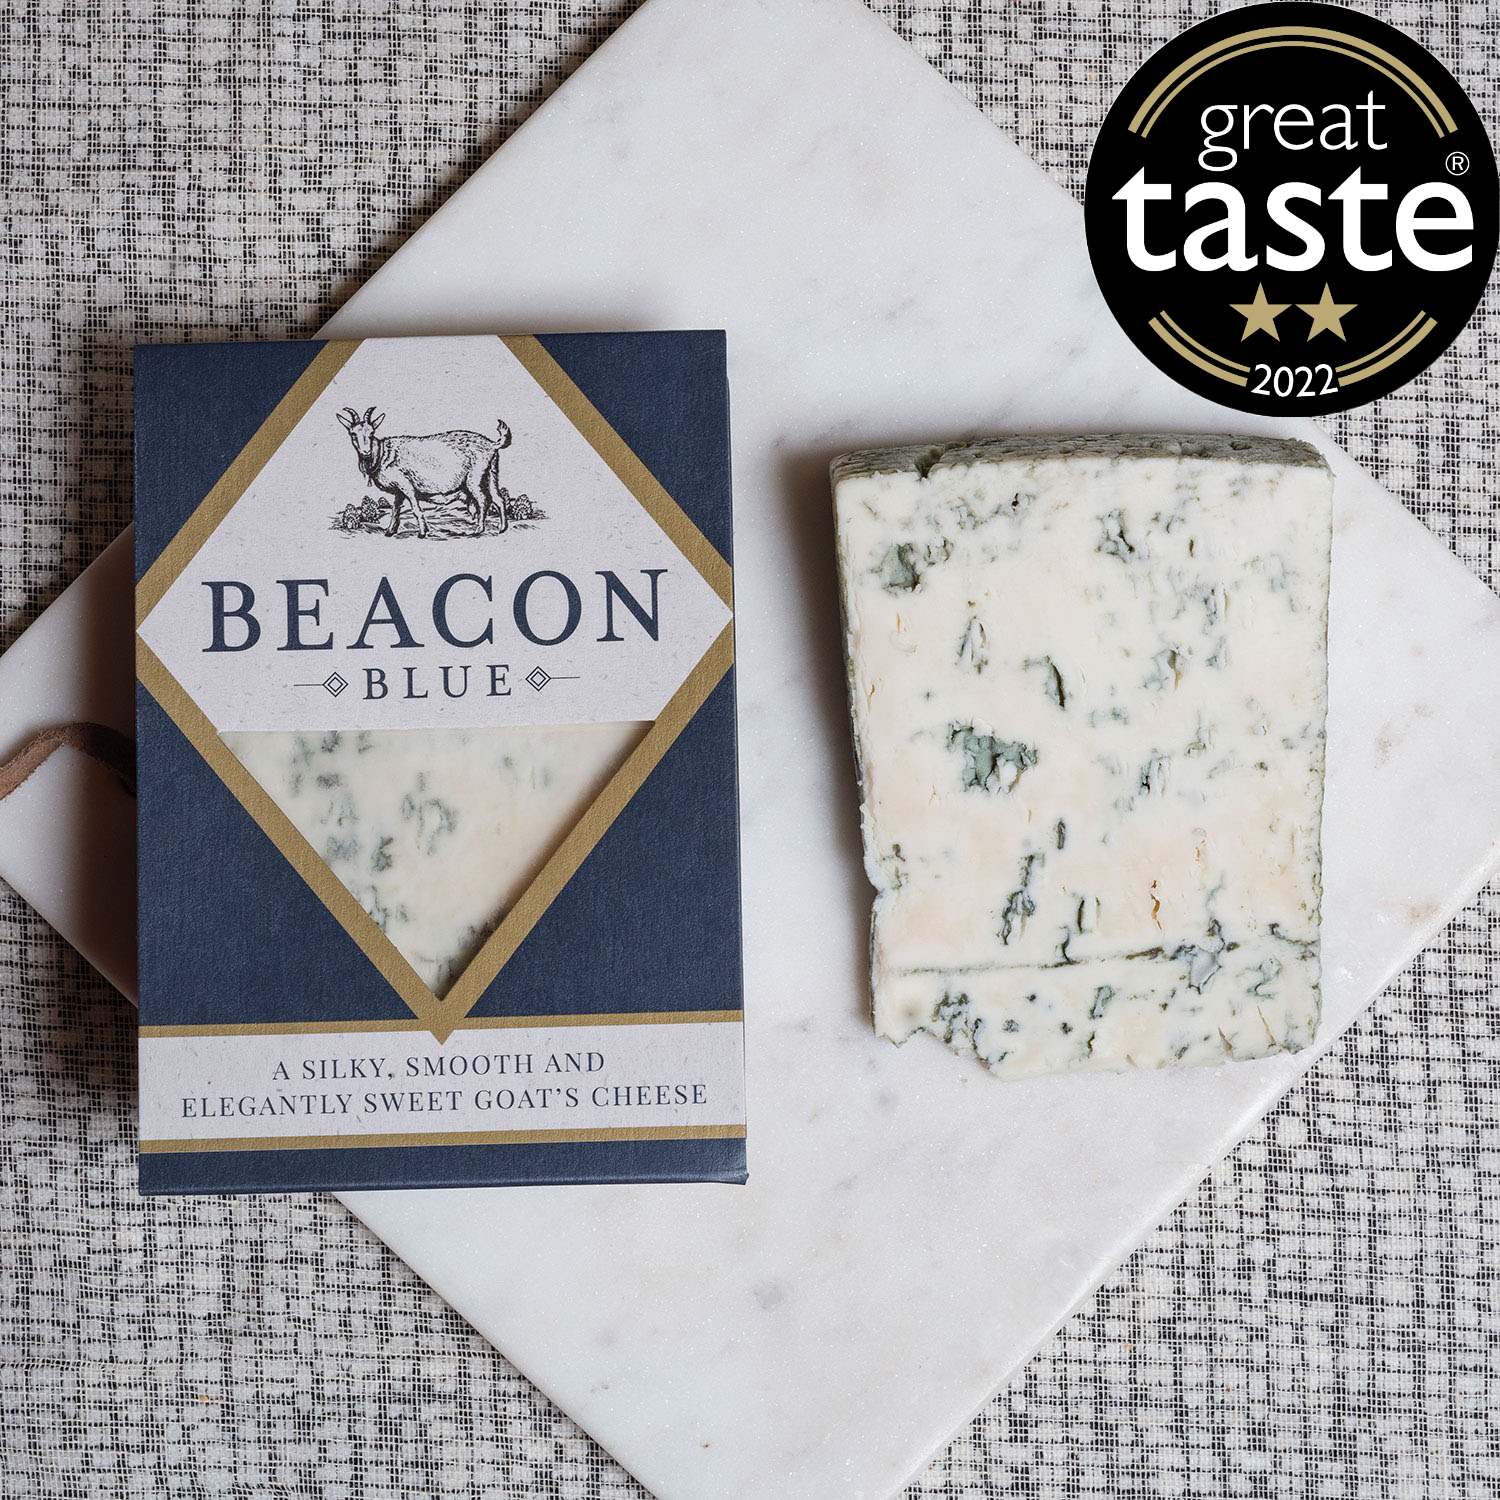 Beacon Blue, our award-winning blue goats cheese, sliced on a cheese board next to it's packaging